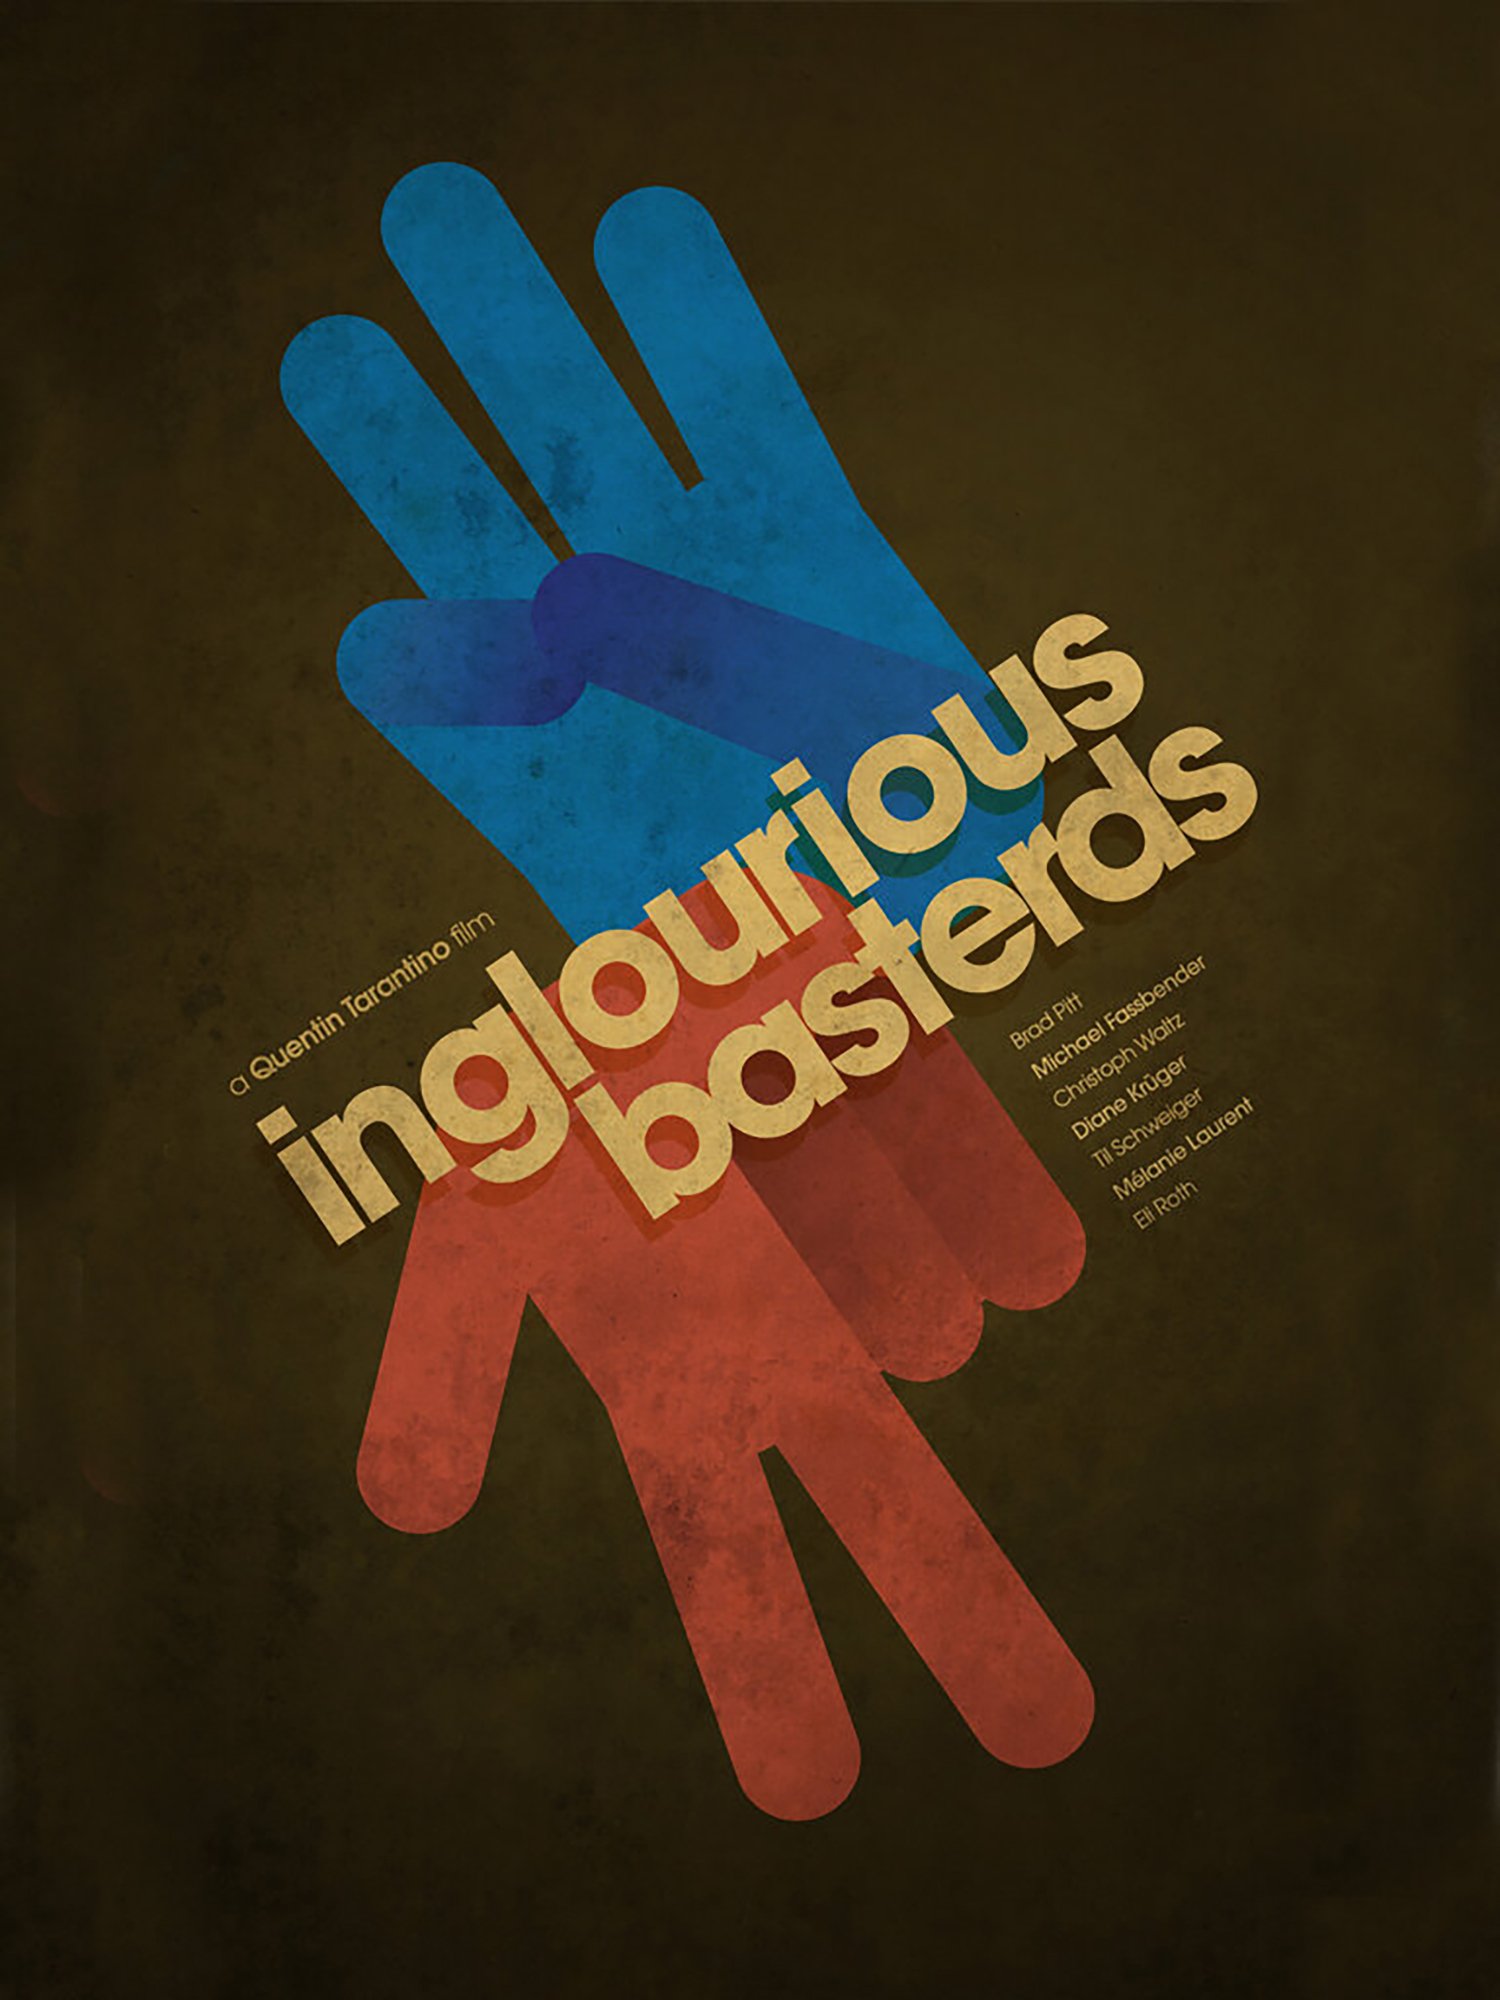 Fan made movie poster for Inglourious Basterds by Ibraheem Youssef.